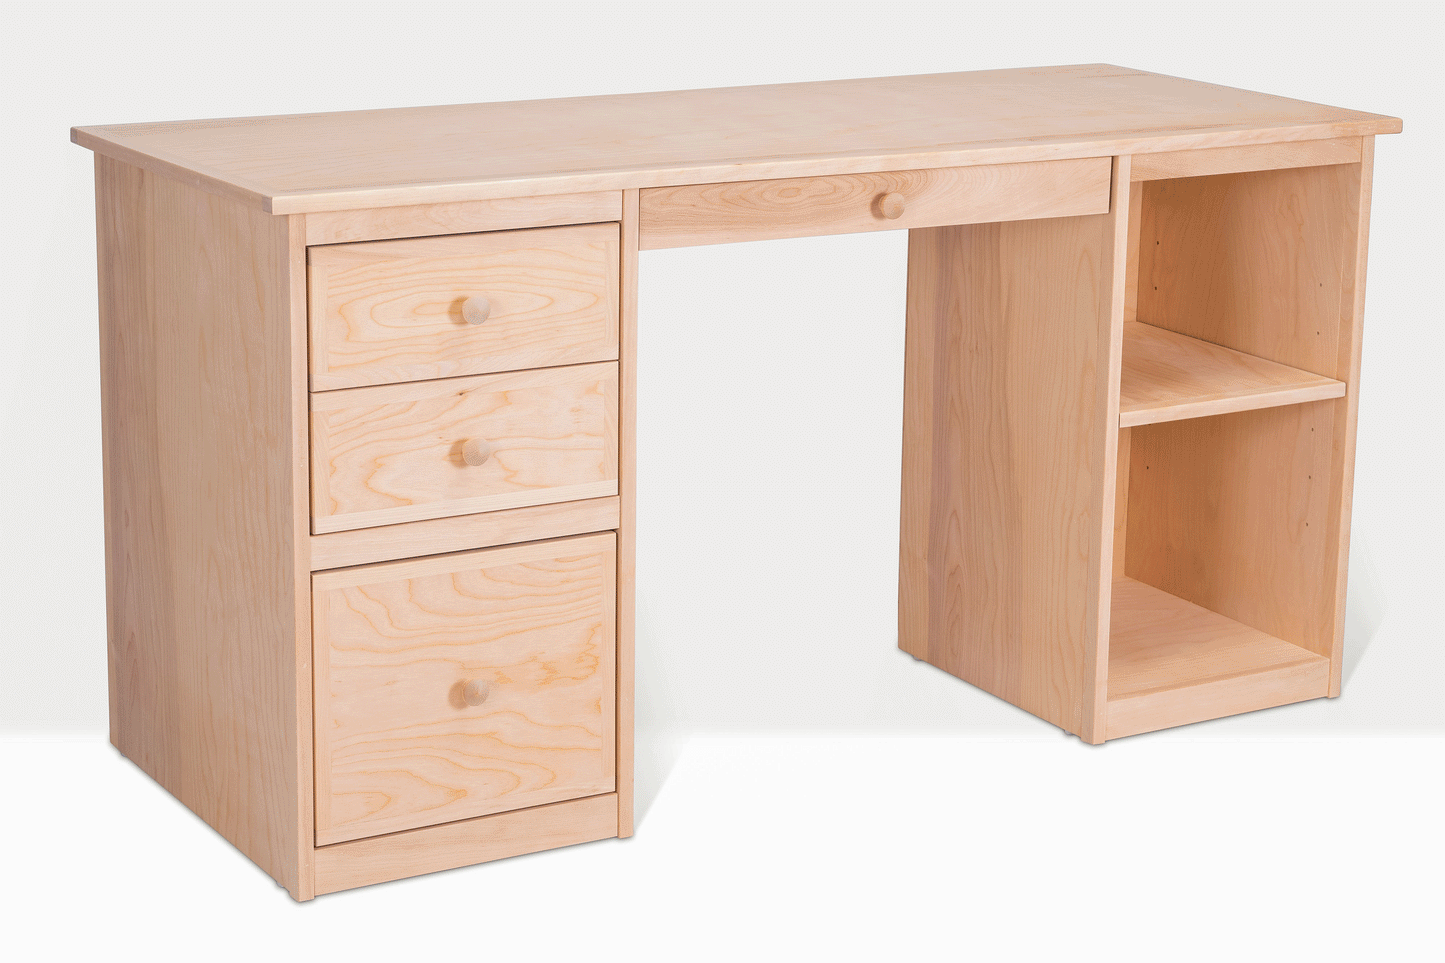 Berkshire Home Desk shown with all drawers open, unfinished birch.